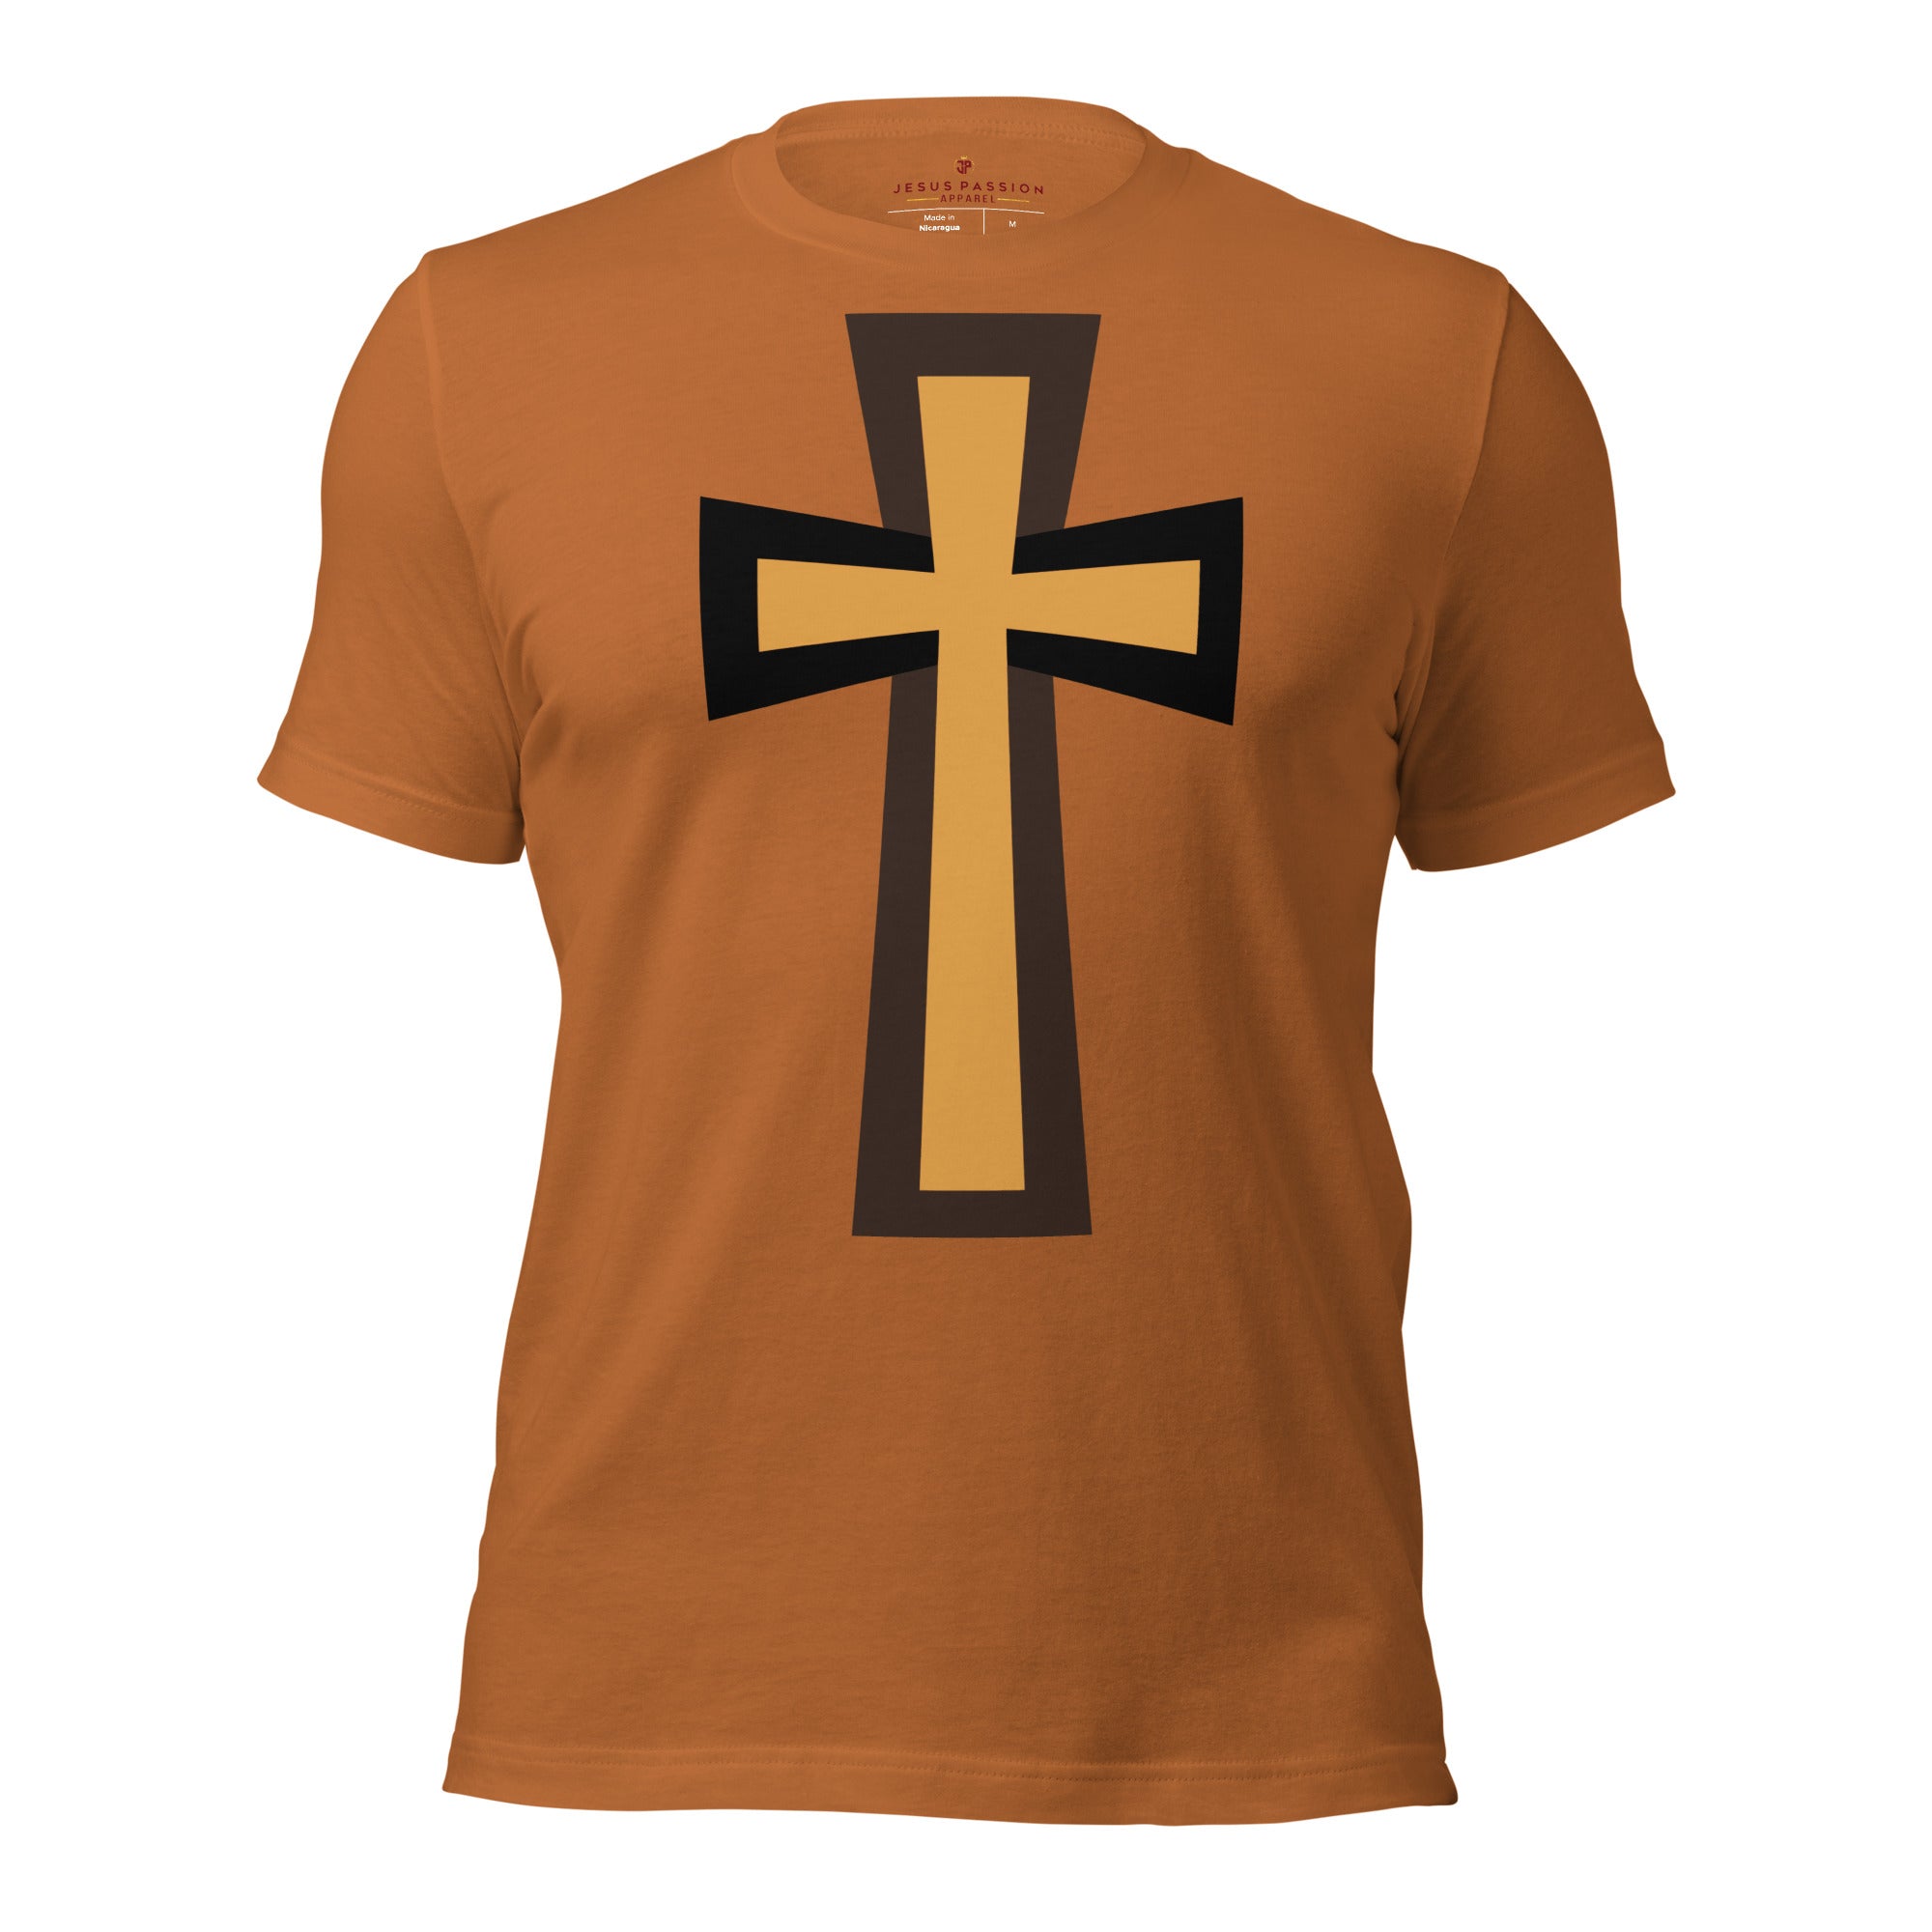 Bold Brown Cross Jersey Short Sleeve T-Shirt Color: Toast Size: XS Jesus Passion Apparel